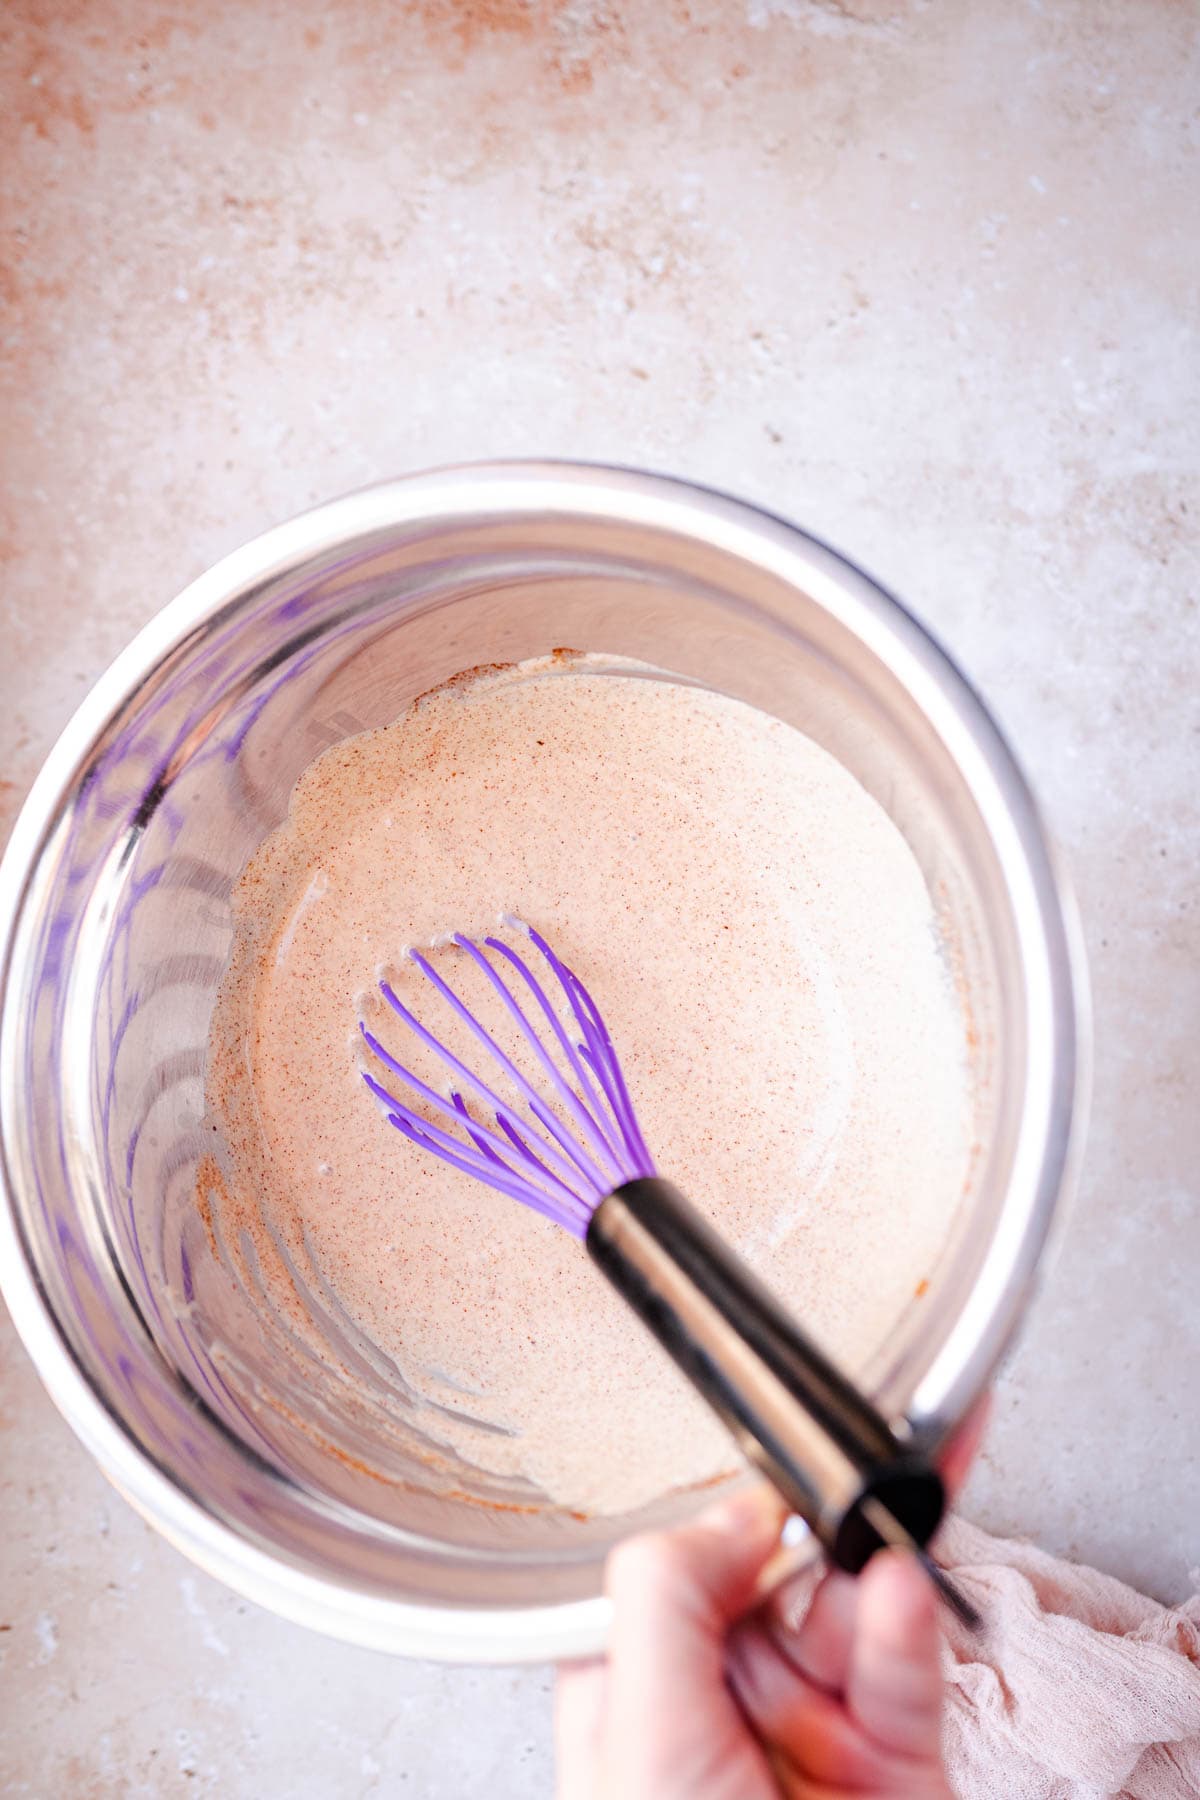 A purple whisk stuck in a light red sauce in a silver mixing bowl.